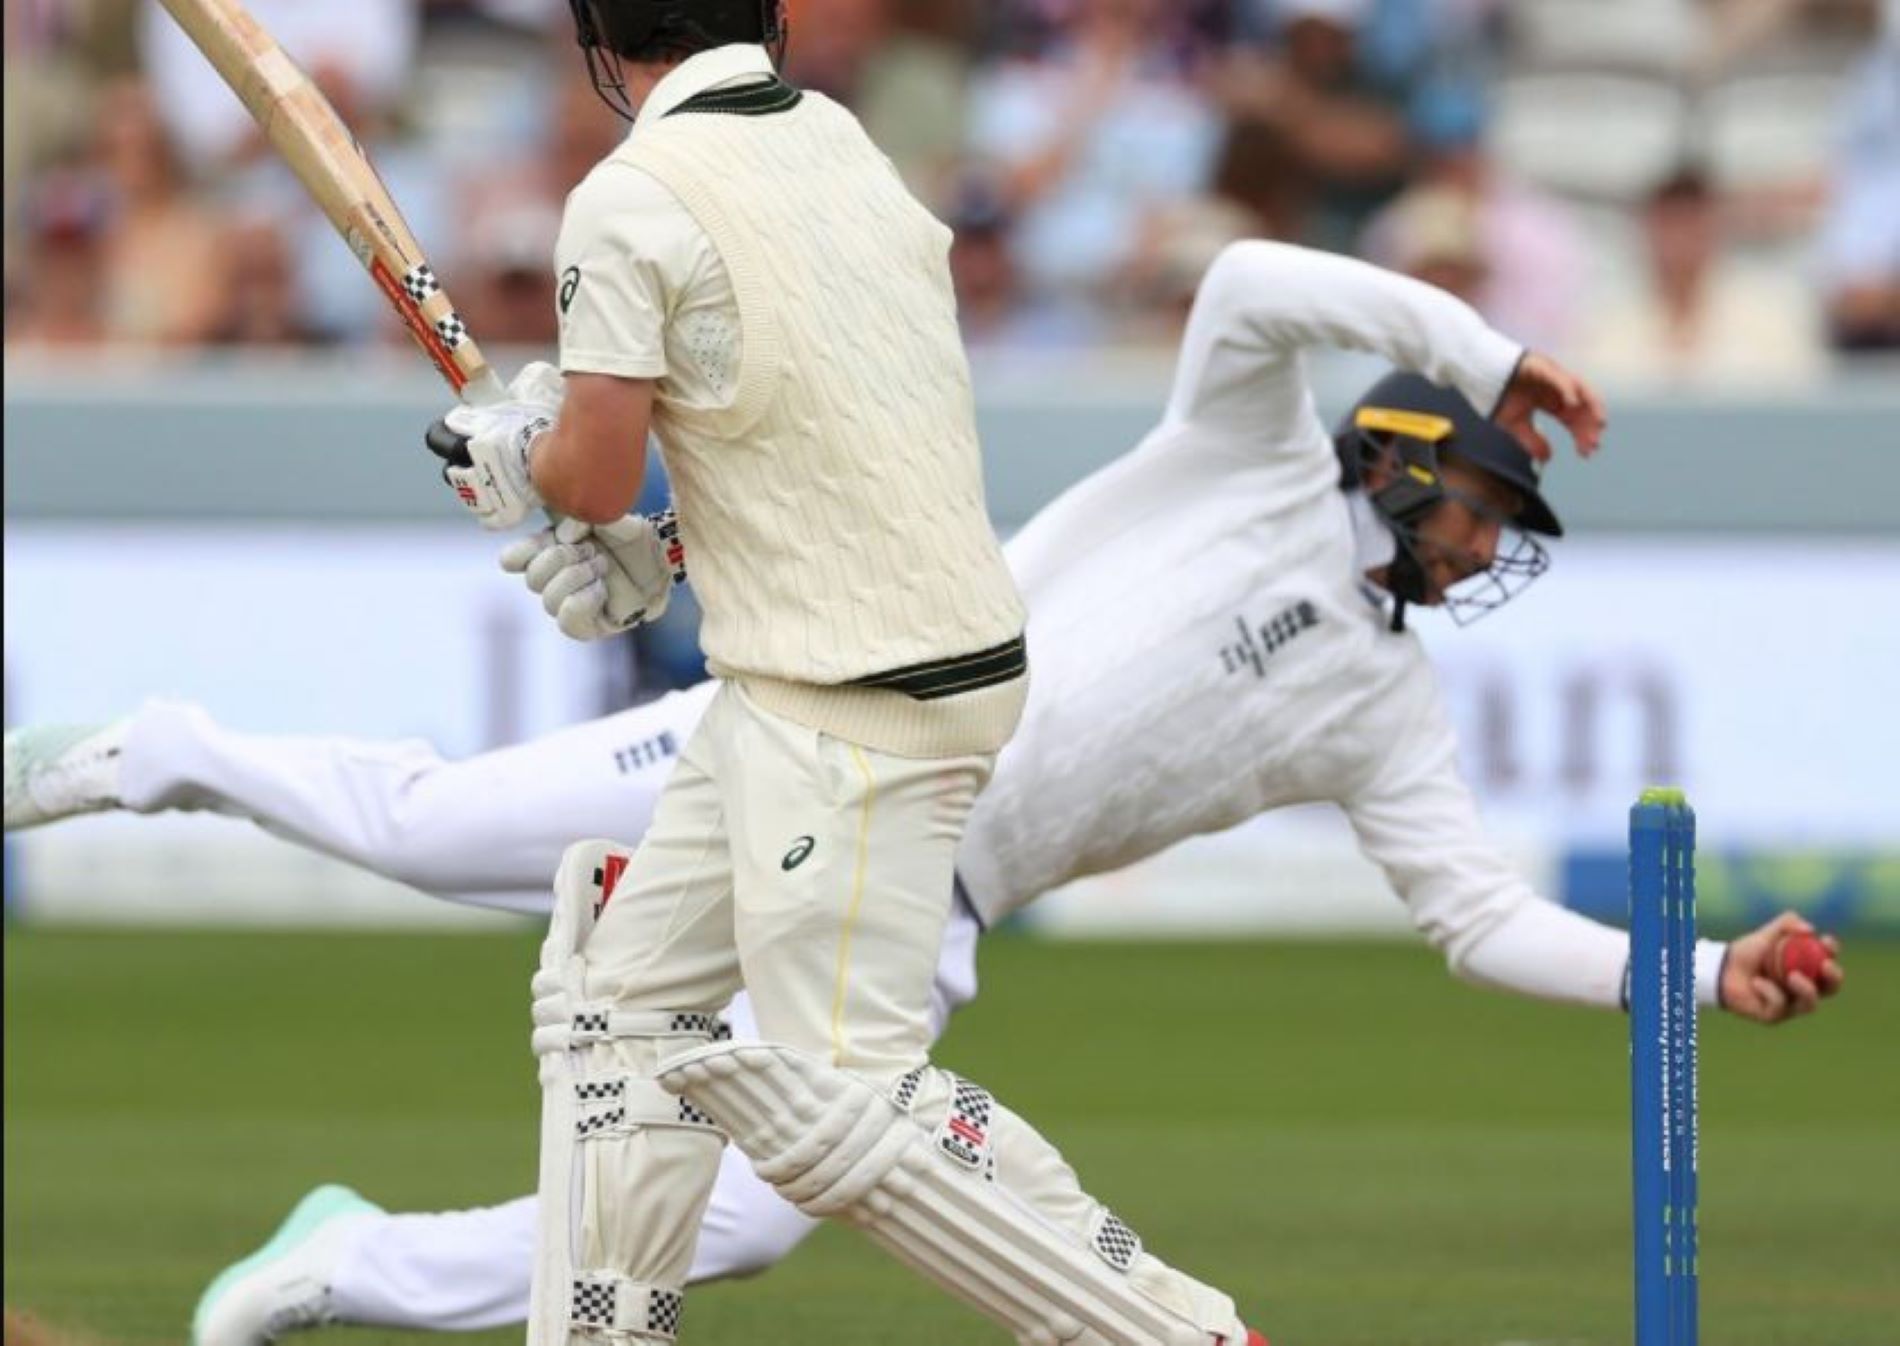 Joe Root pulled off a one-handed stunner to break the record